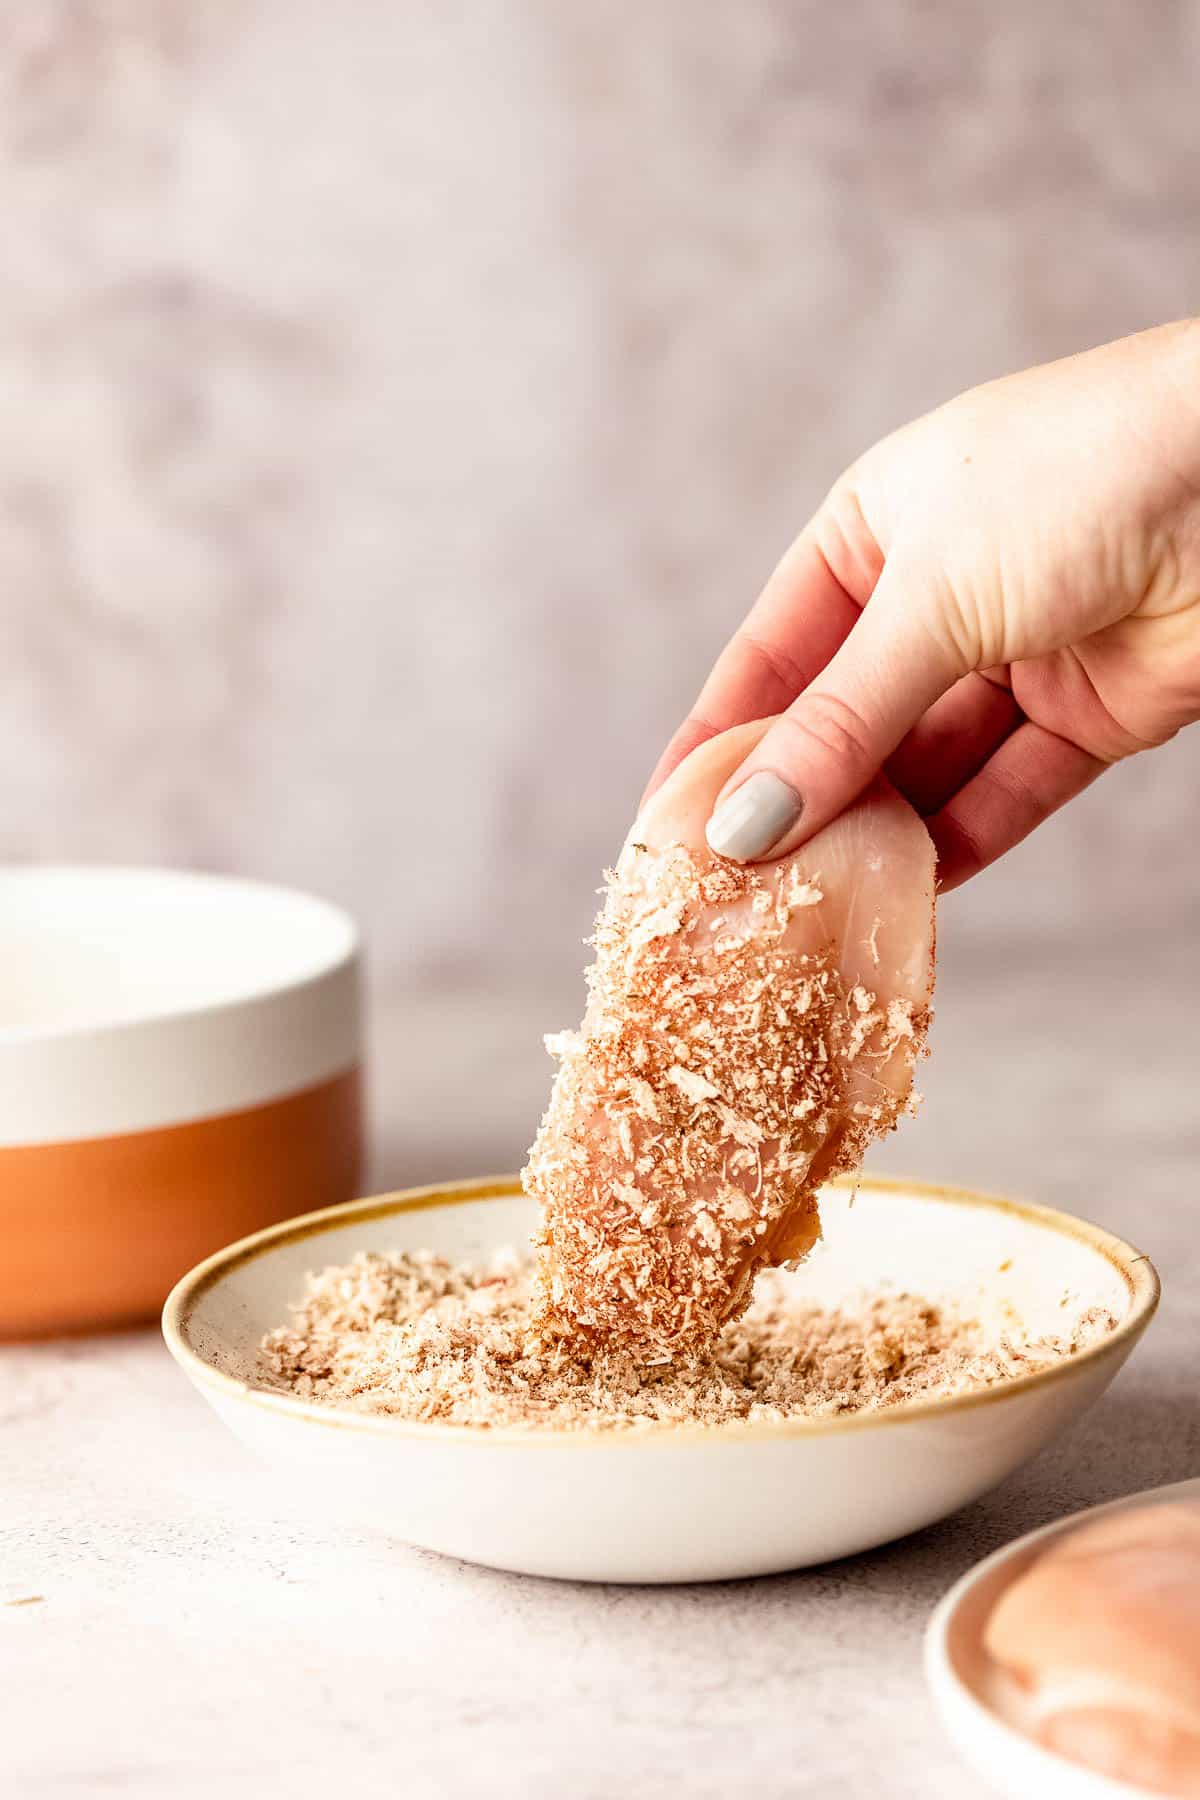 A person dipping chicken breasts in panko bread crumbs.